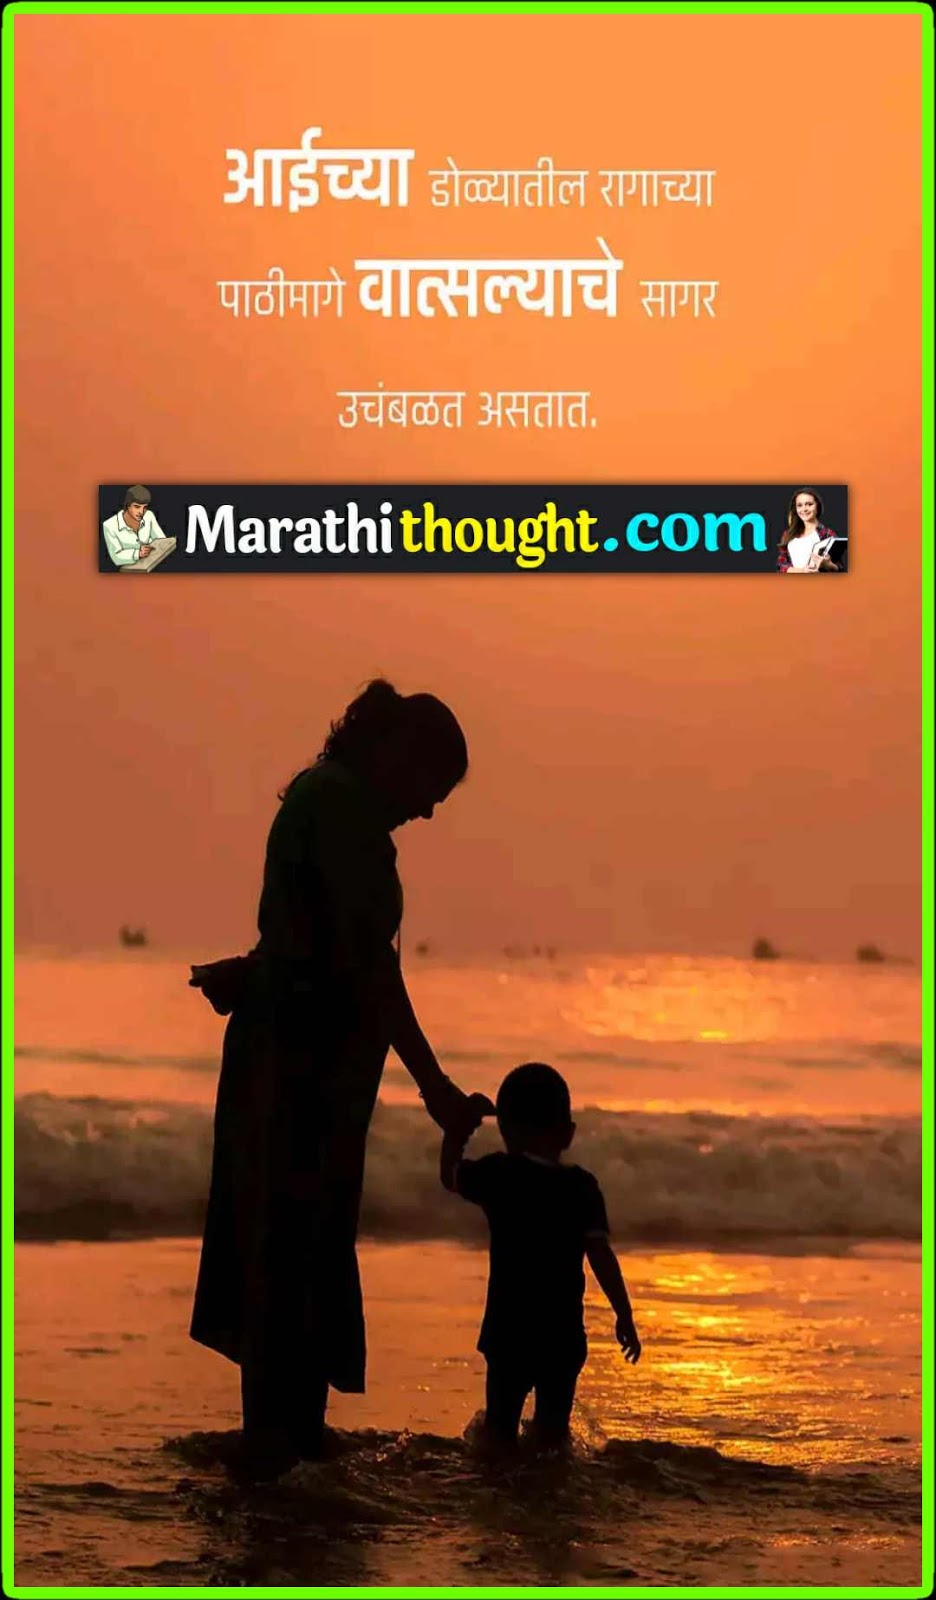 Good thoughts in marathi on life | good thoughts in marathi for ...